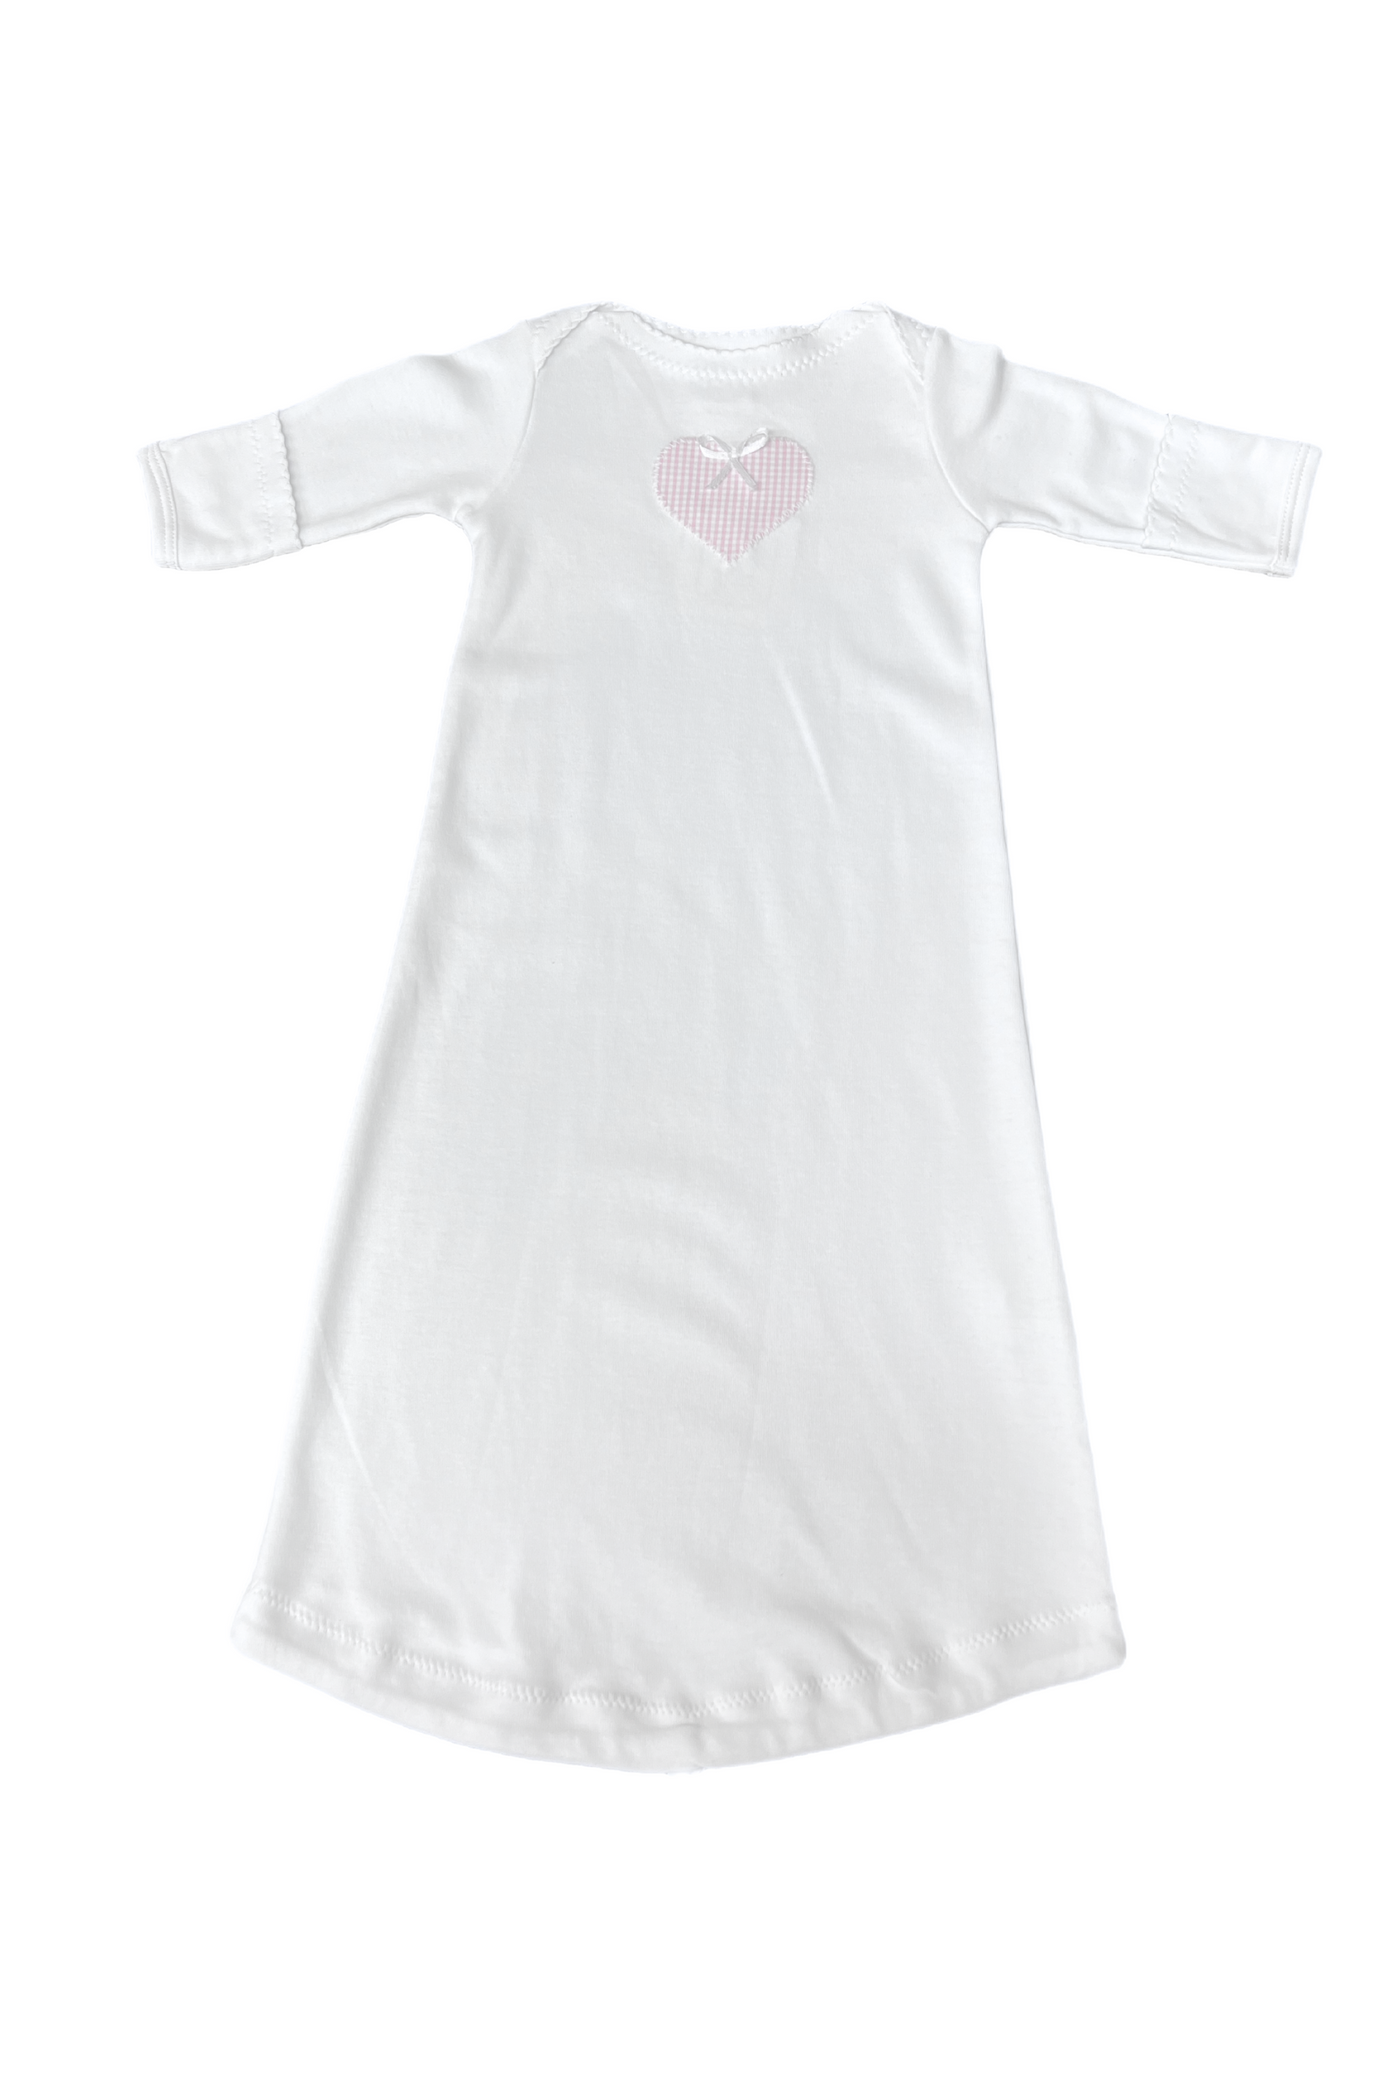 JJ Applique Day Gown Pink Check Heart